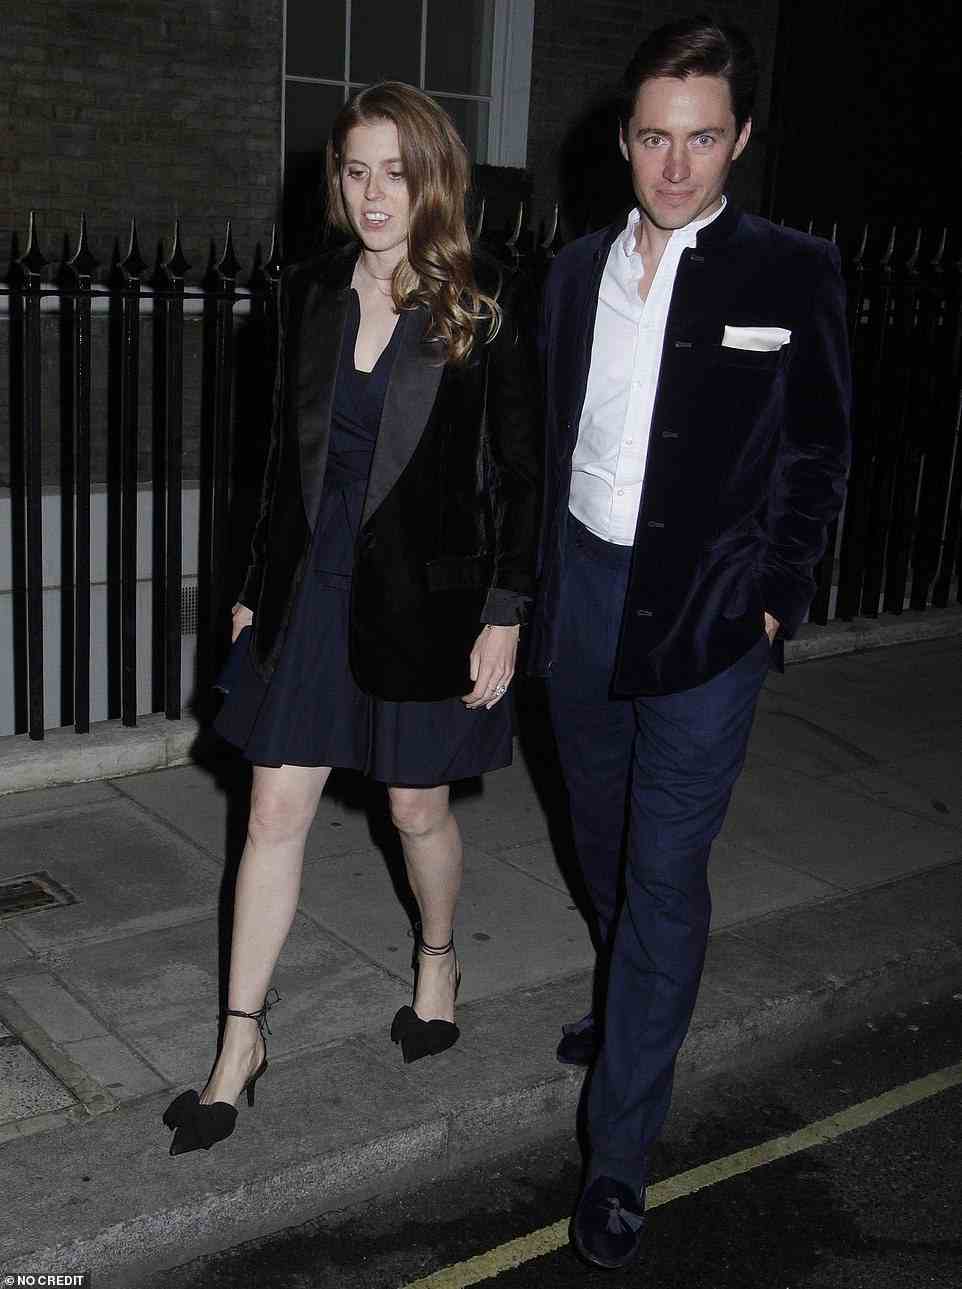 Princess Beatrice and husband Edoardo went to the private member's club Maison Estelle for drinks last night